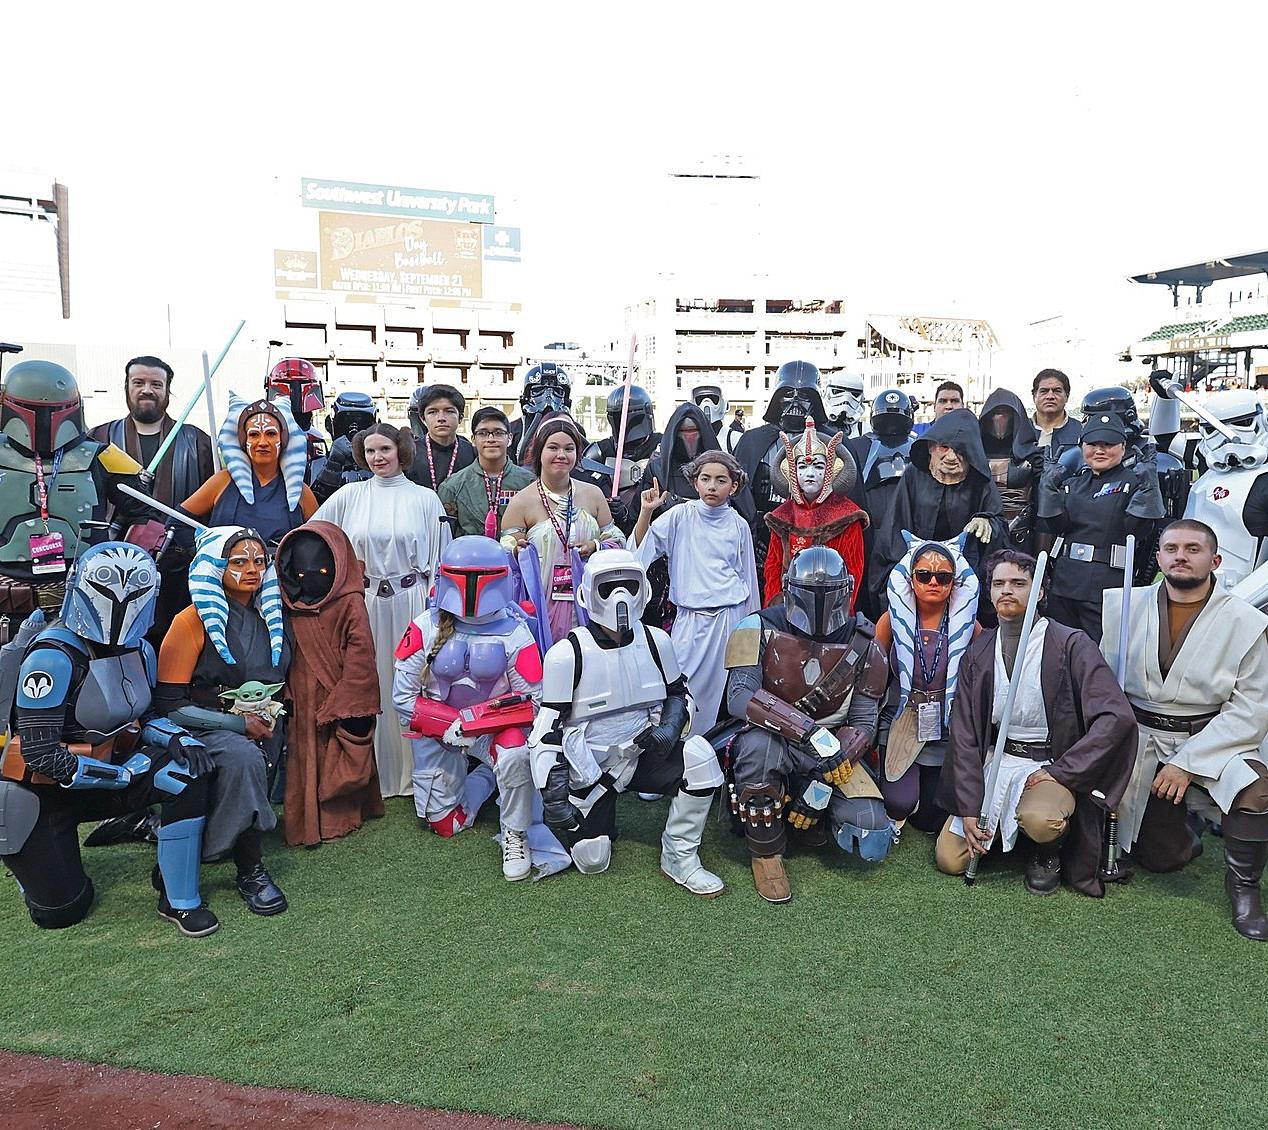 El Paso Chihuahuas - Wakanda Forever We're excited to announce